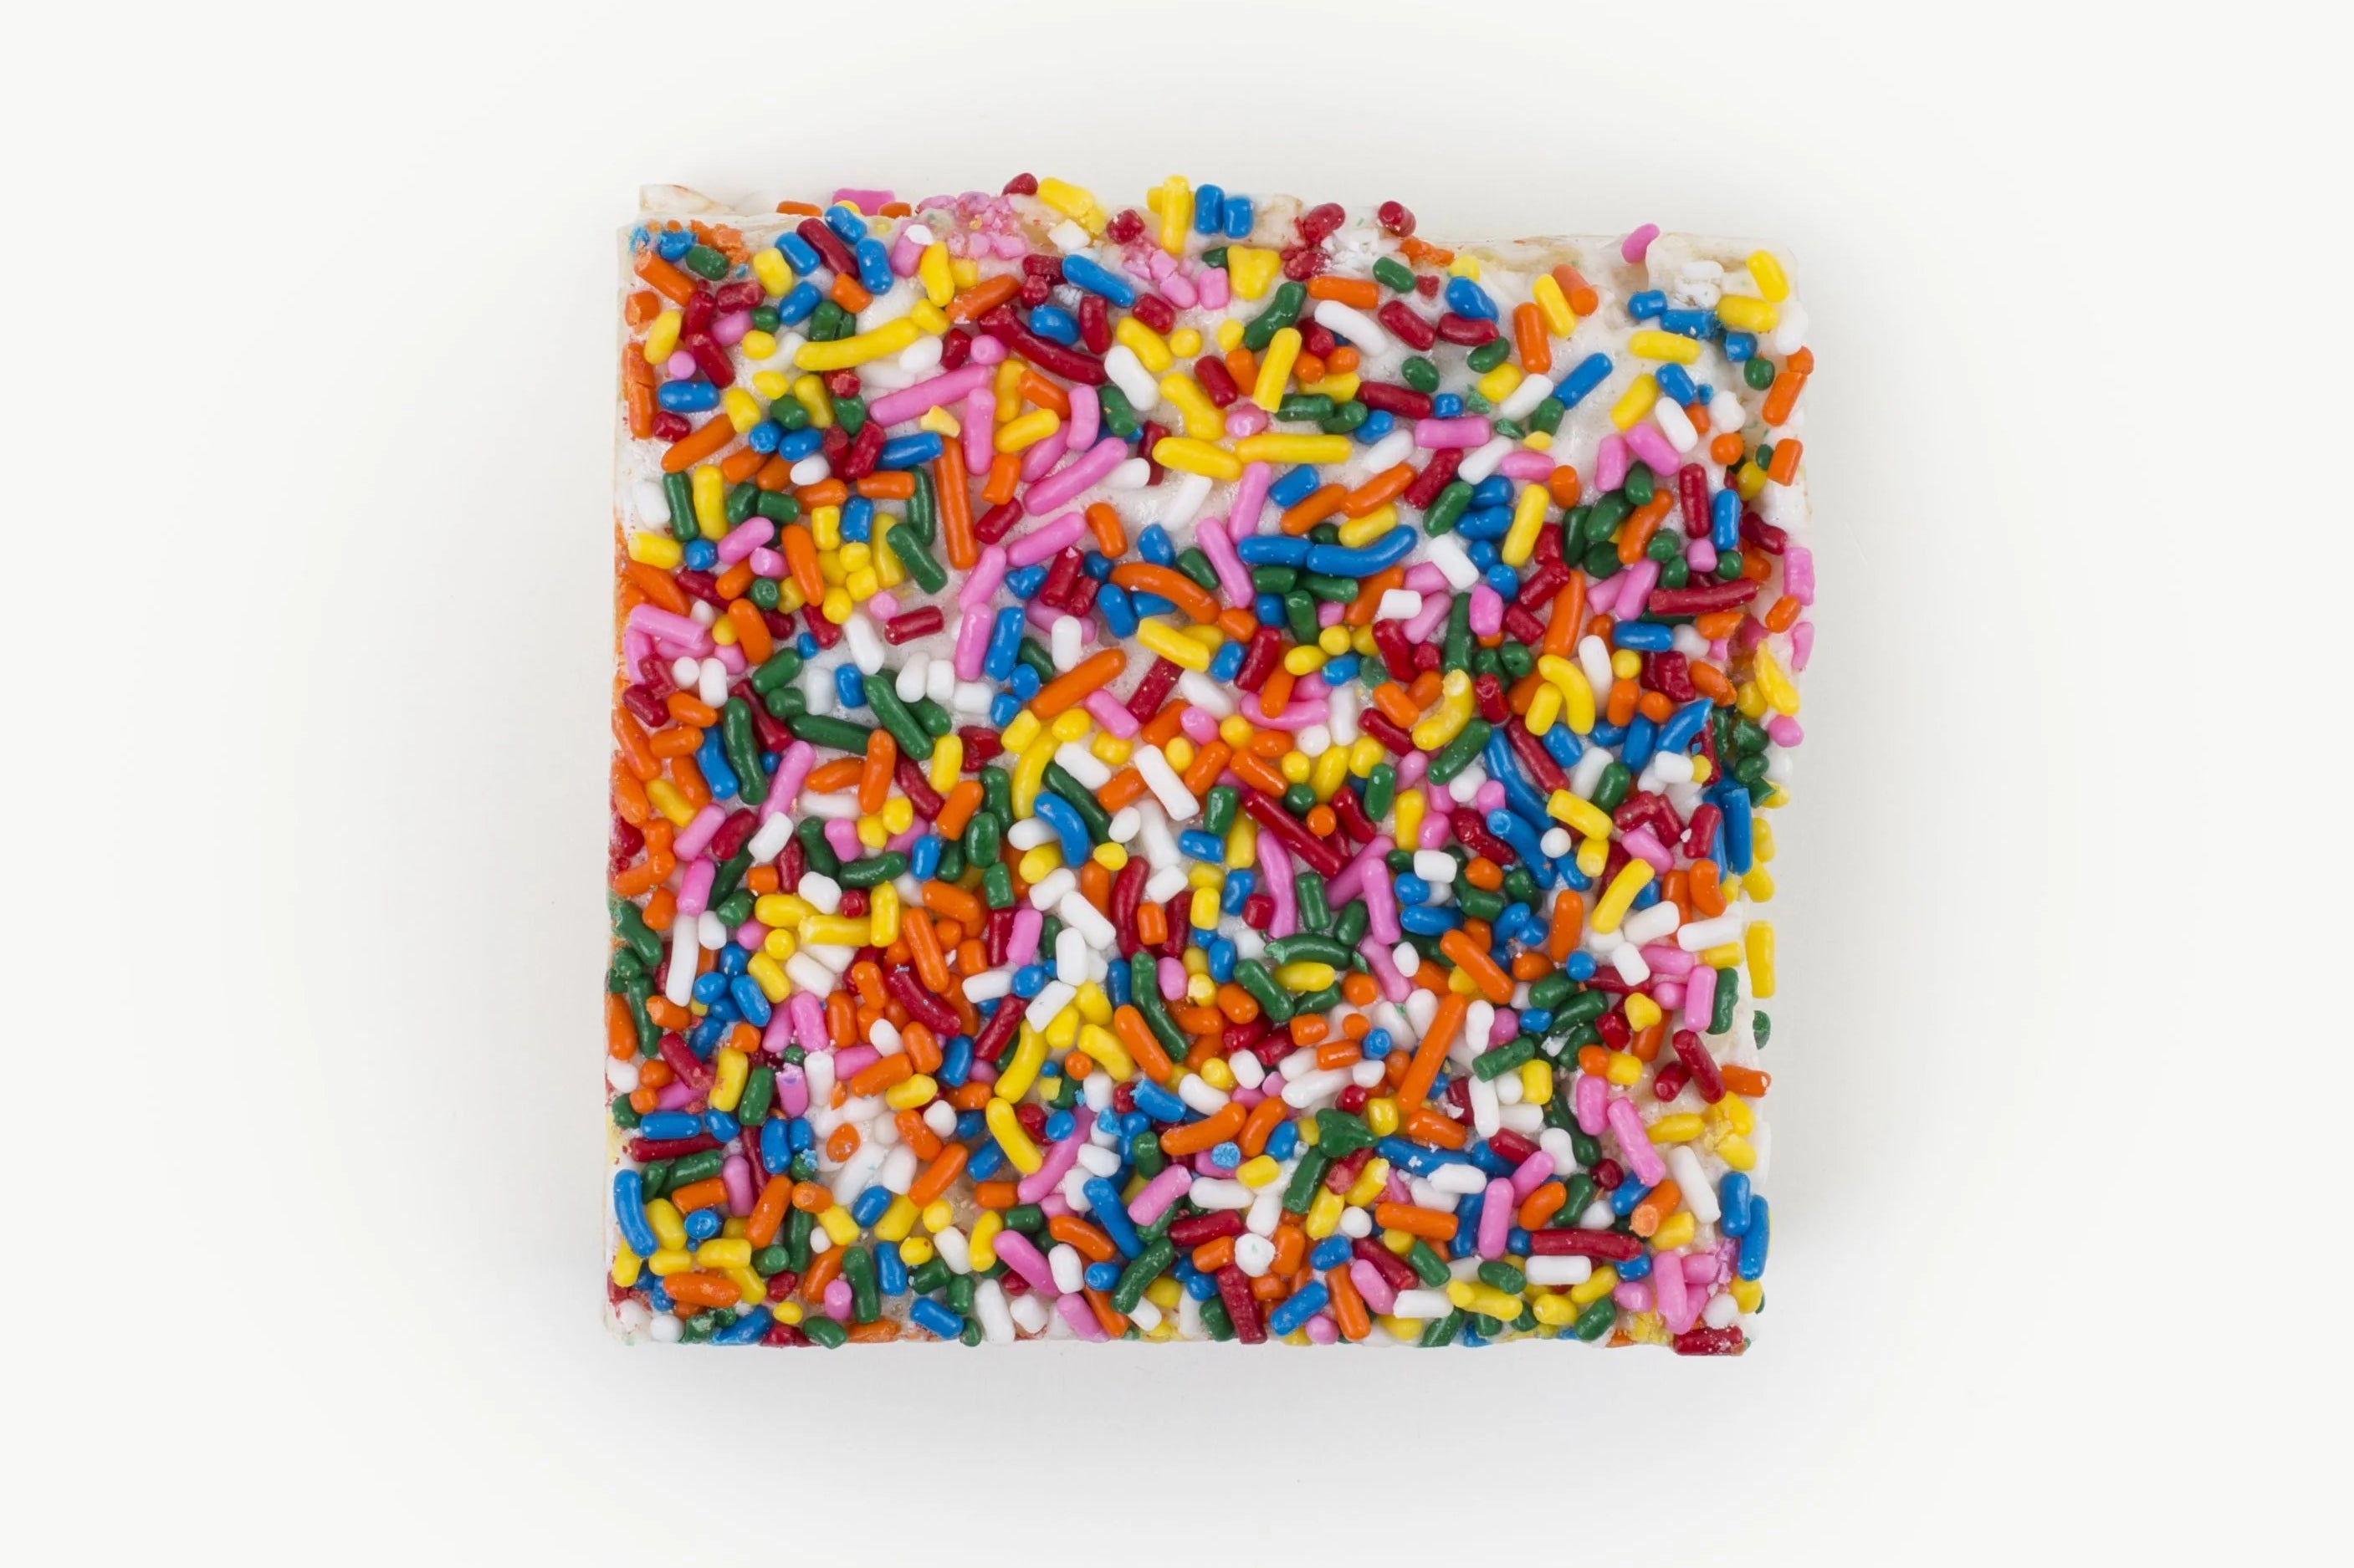 Square Rainbow Sprinkles Crispy Cake by Lolli & Pops on white background. 